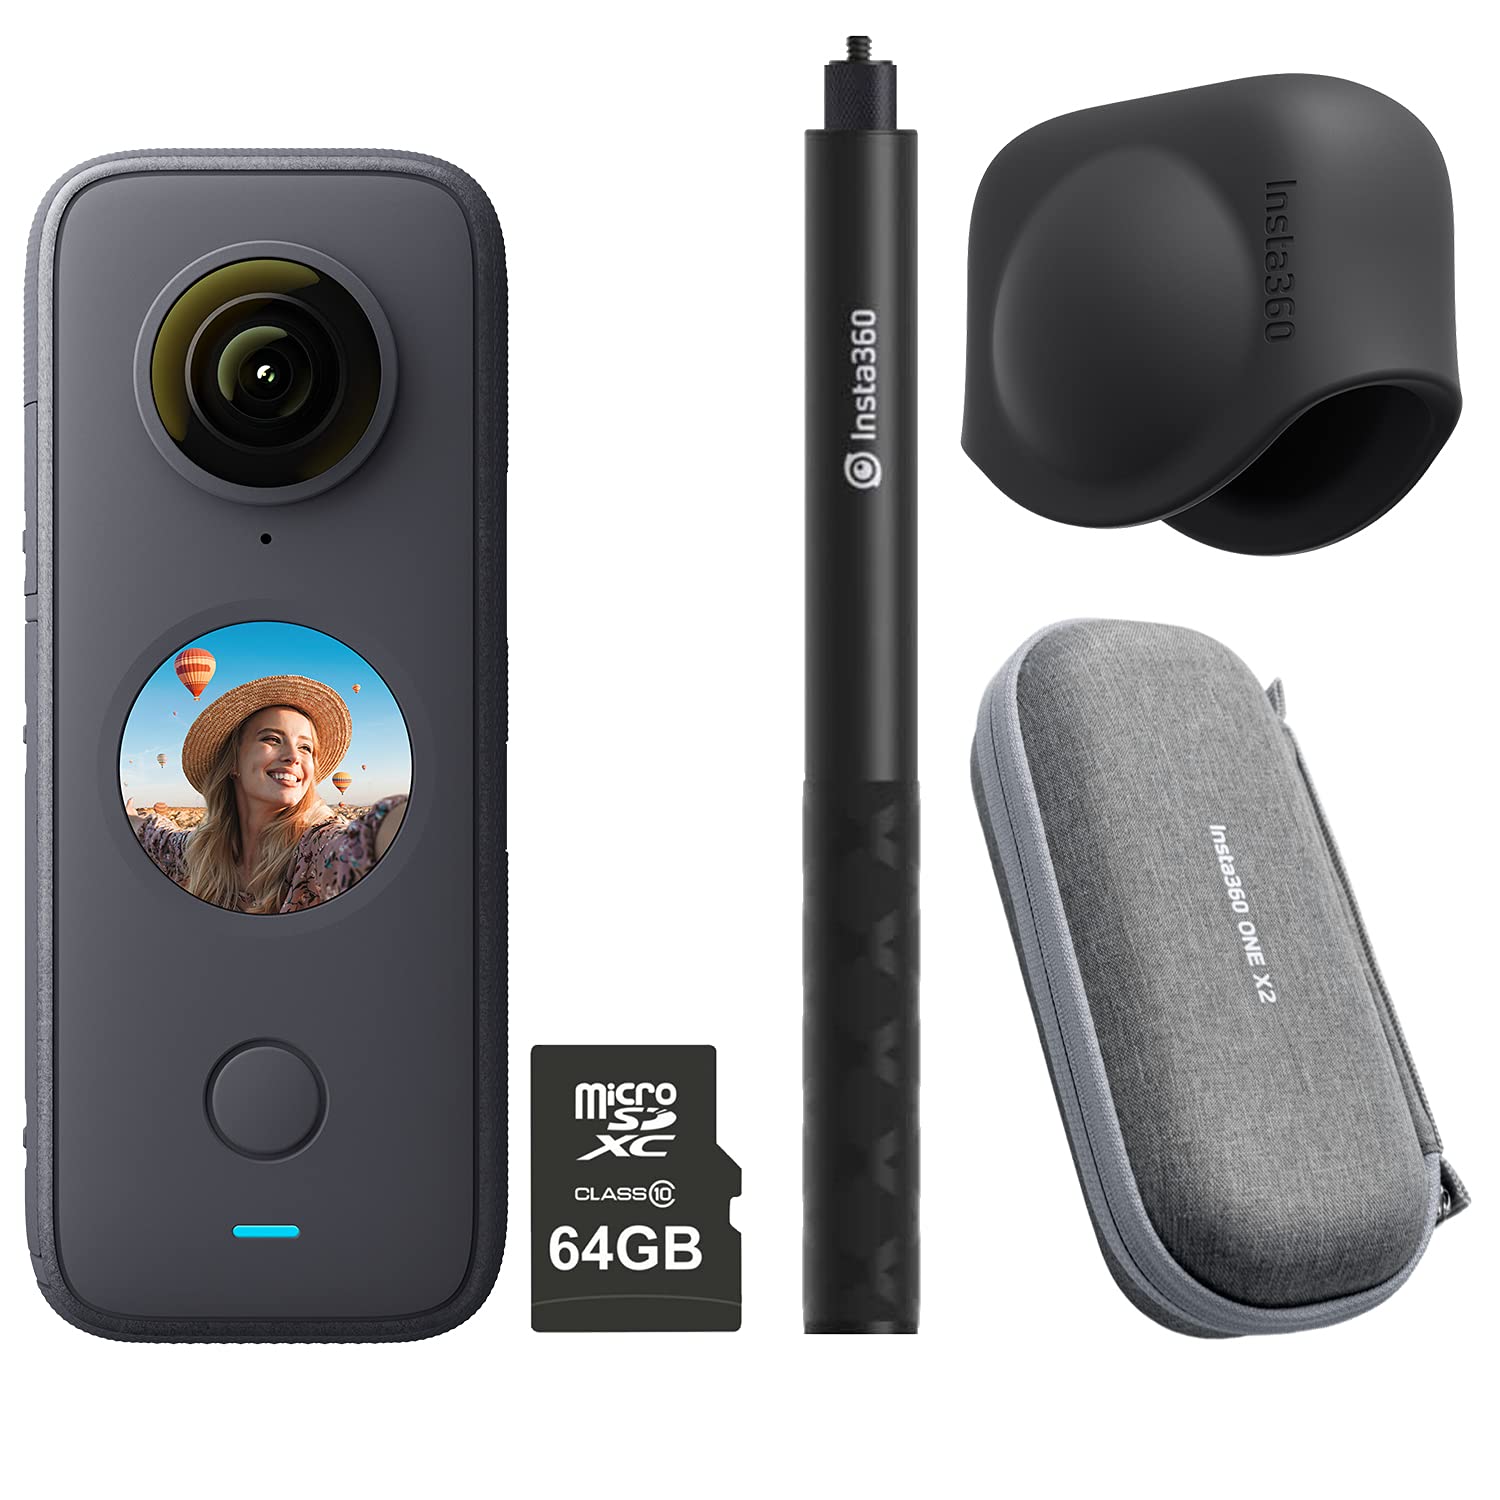 Insta360 ONE X2 360 Degree Action Camera PRO Kit includes 64GB Micro SDHC Card + Case + Invisible Selfie Stick + Lens Cap